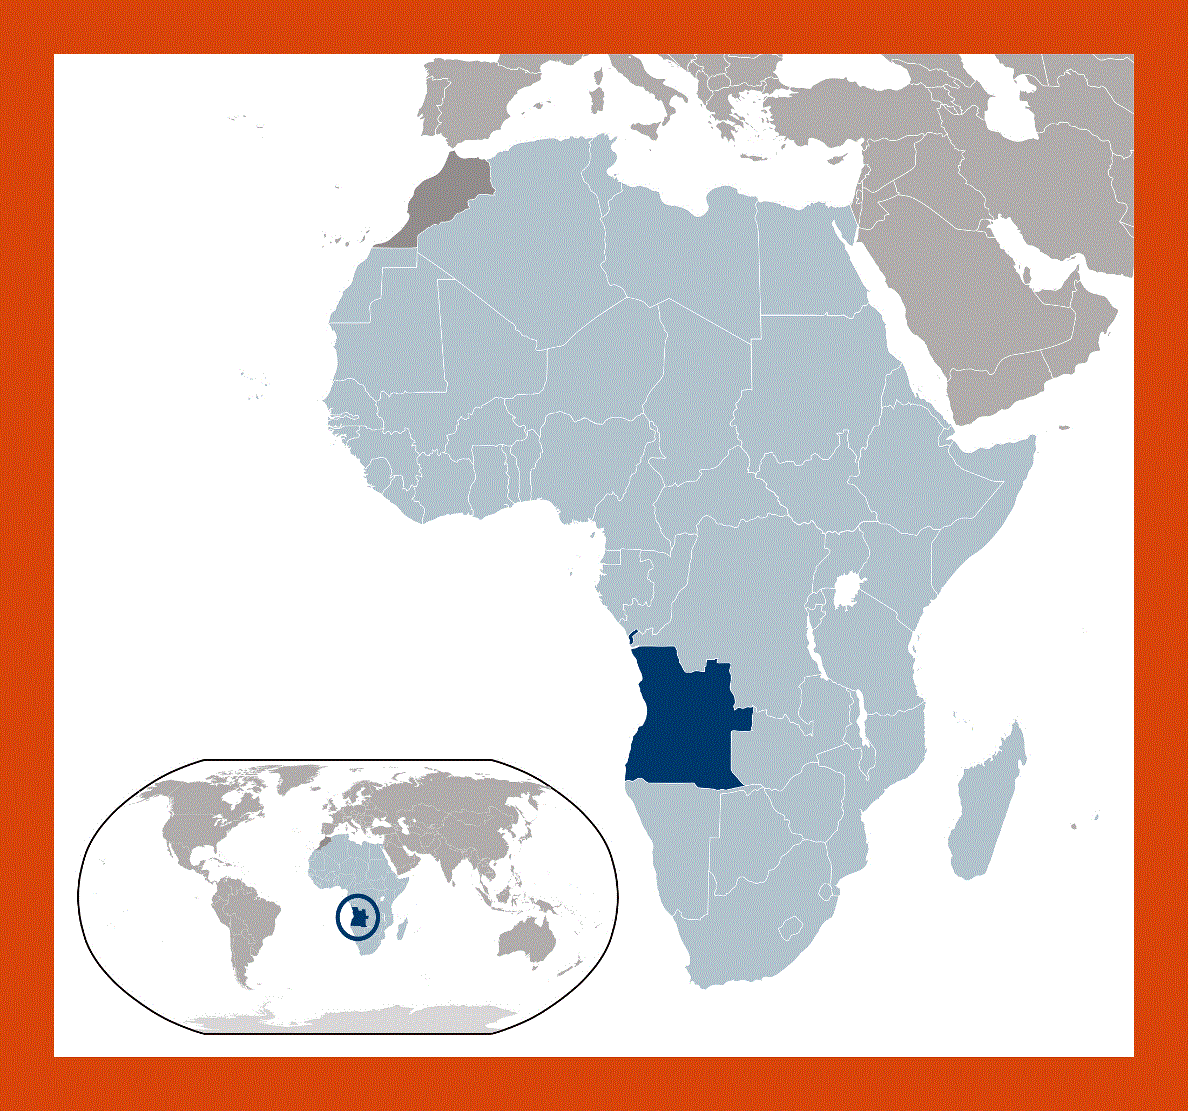 Location map of Angola